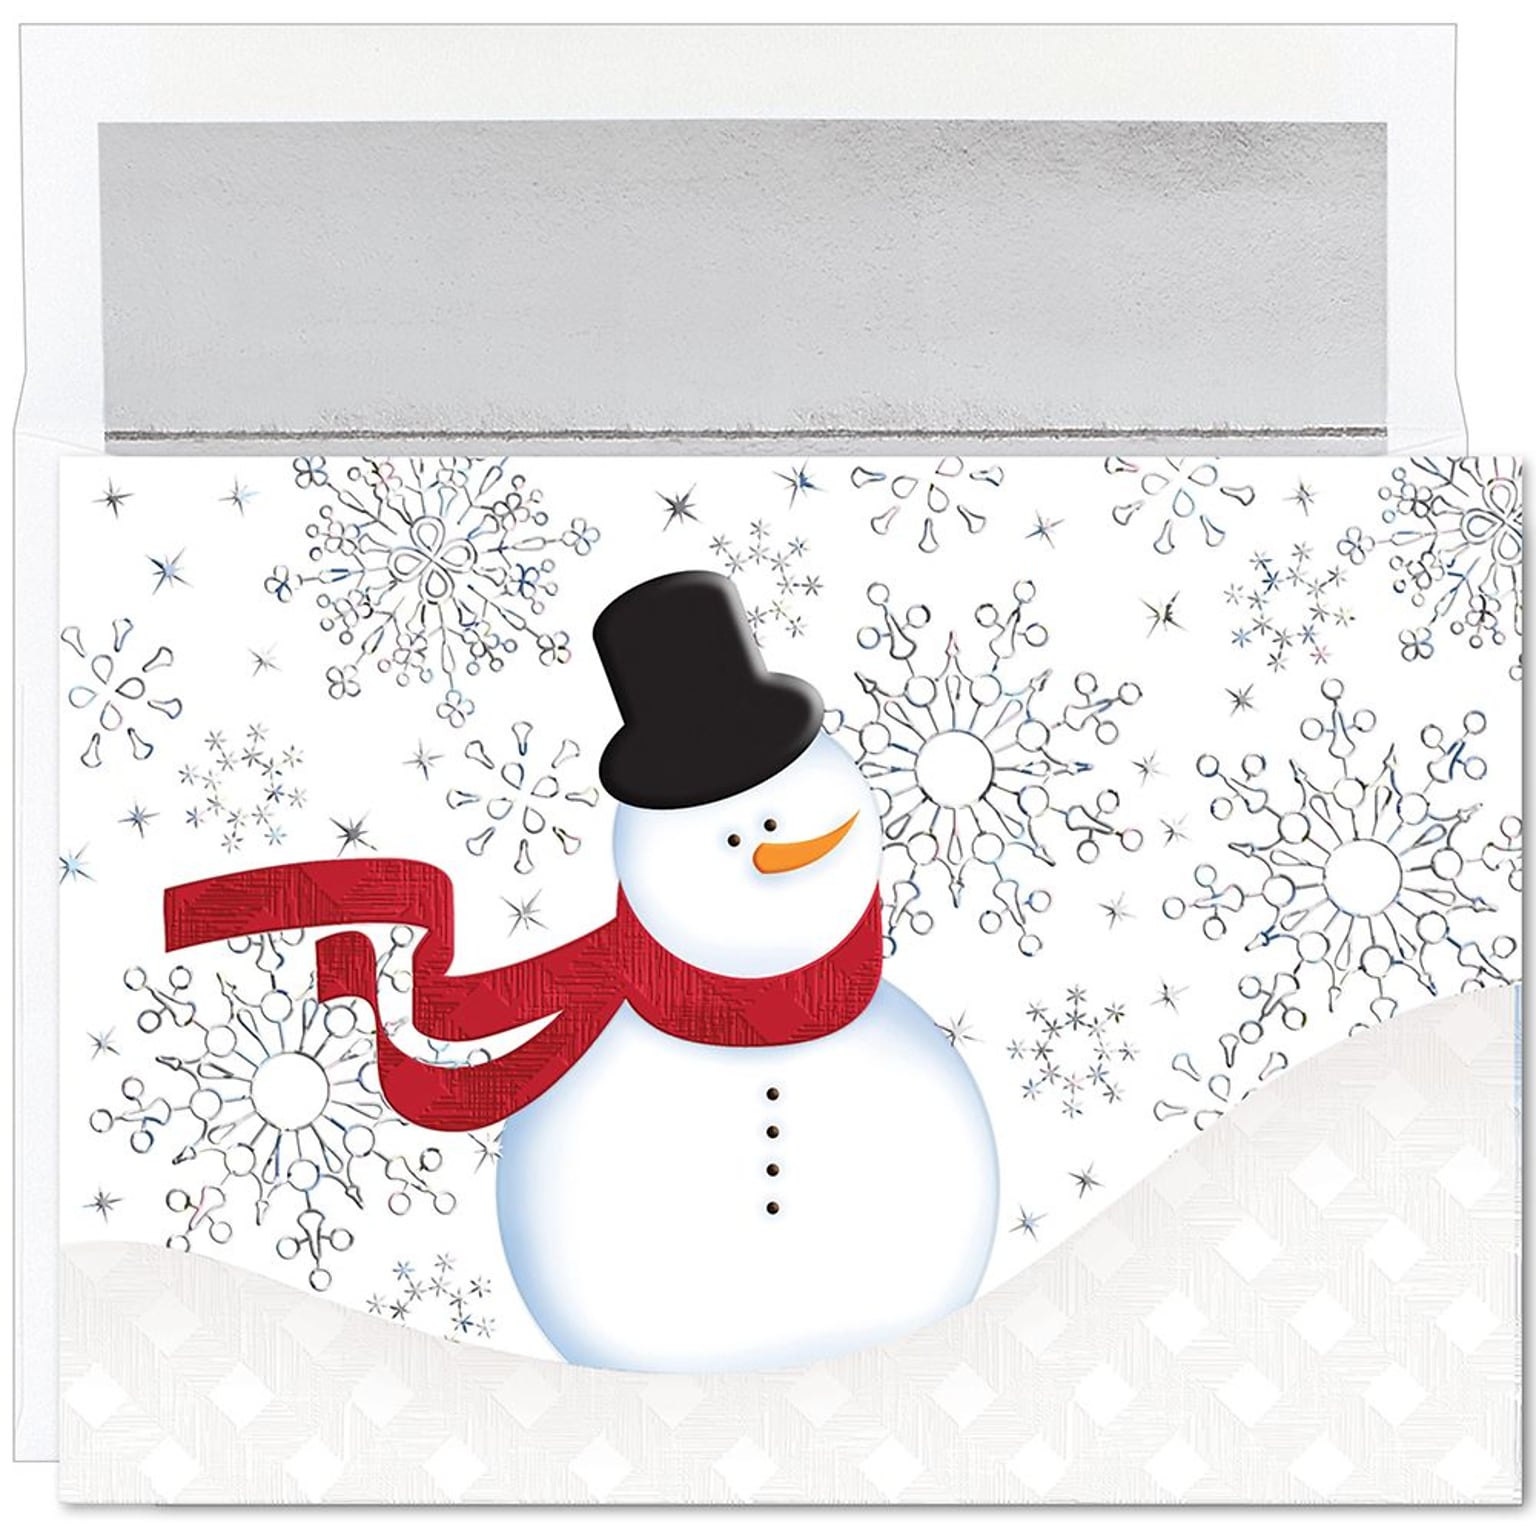 Great Papers!® Holiday Greeting Cards, Snappy Snowman, 7.875 x 5.625, 16 Cards/16 Foil-Lined Envelopes (907000)